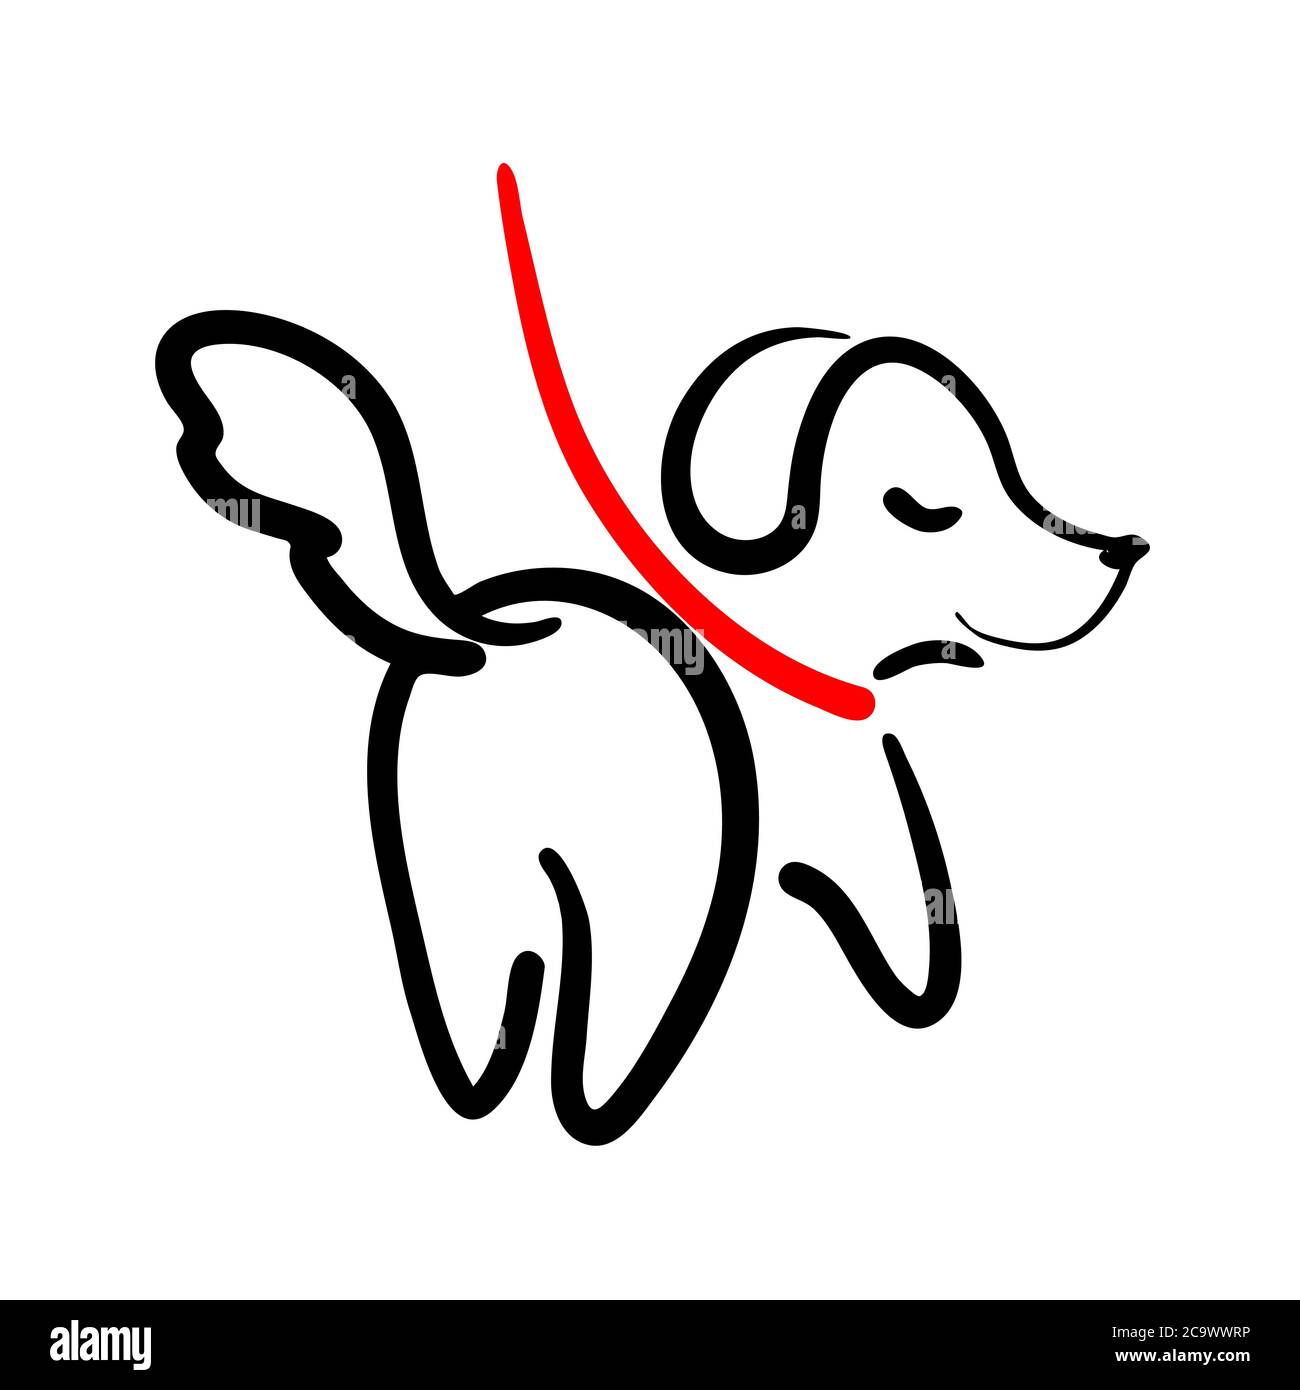 Outline dog on leash illustration. Backside puppy walking line art. Walk with pets logo. Doggy company emblem and pictogram element for highlights. Animal training black isolated vector sign symbol. Stock Vector